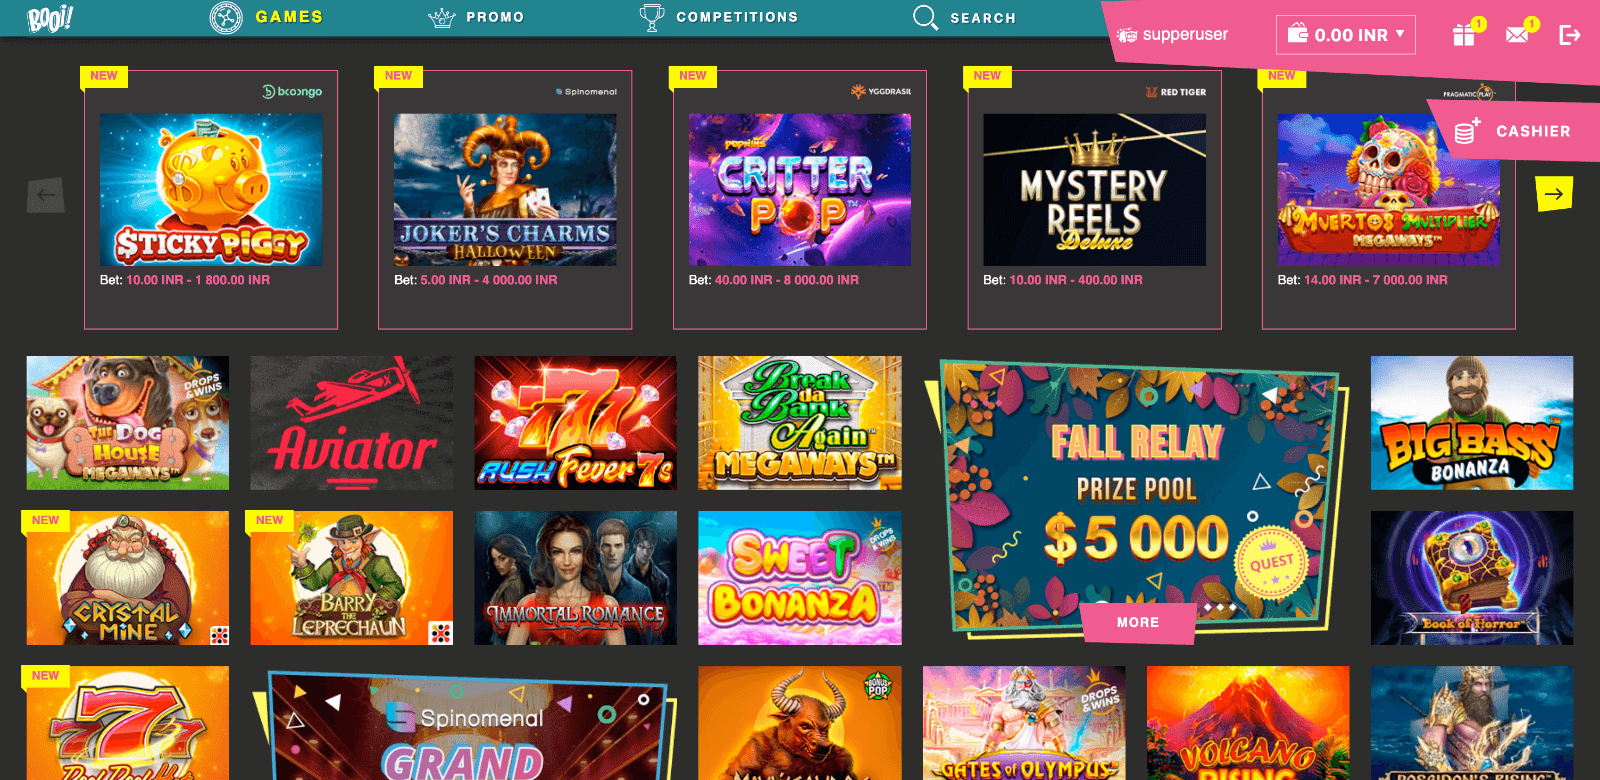 The section with casino games on the official website Booi contains hundreds of interesting games